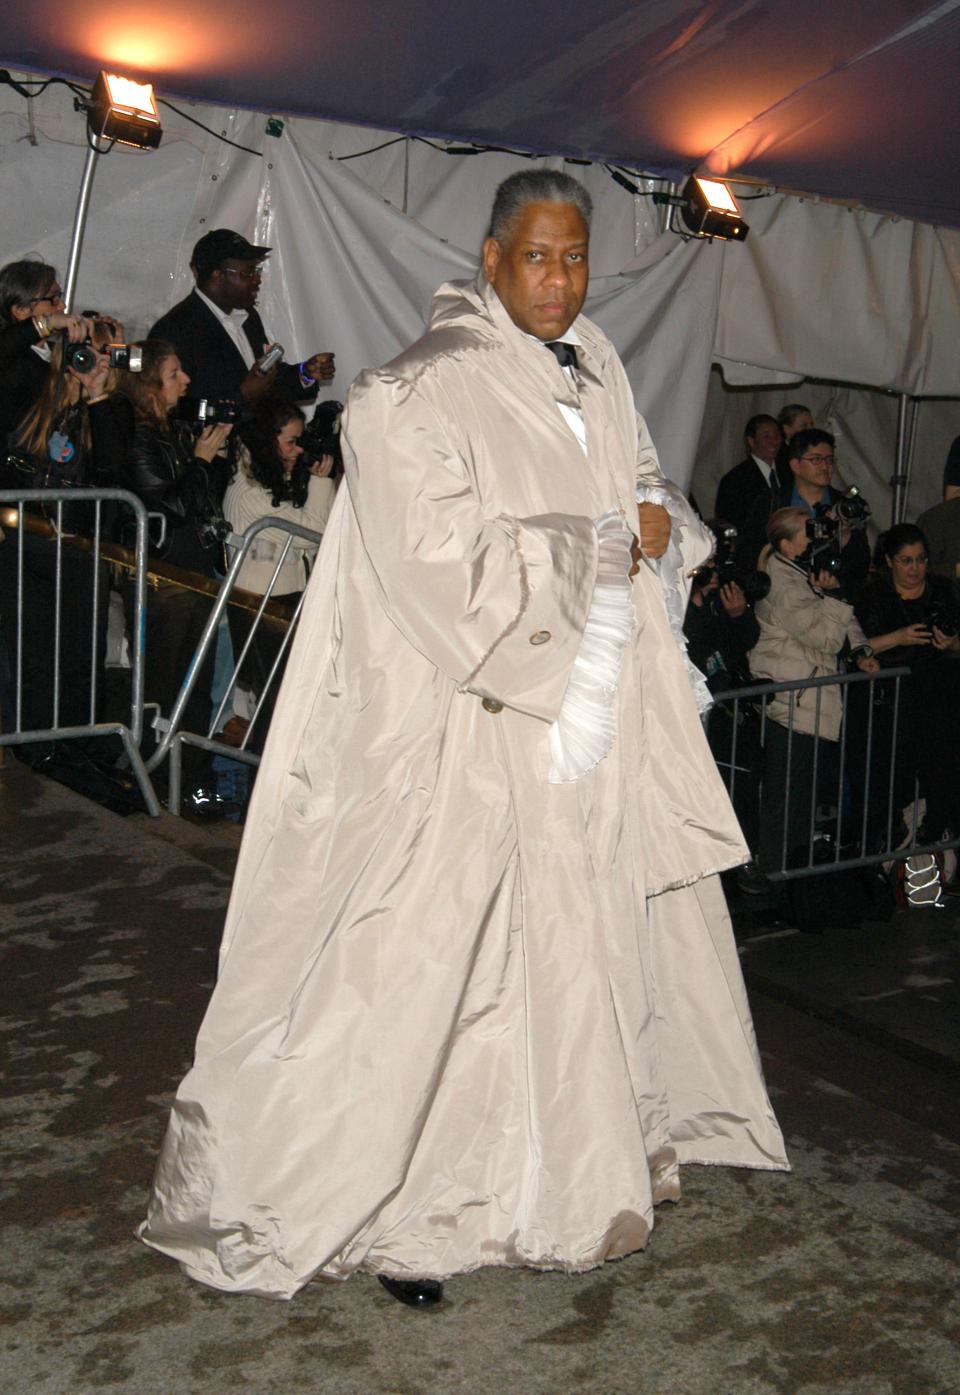 André Leon Talley at the 2004 Met Gala.